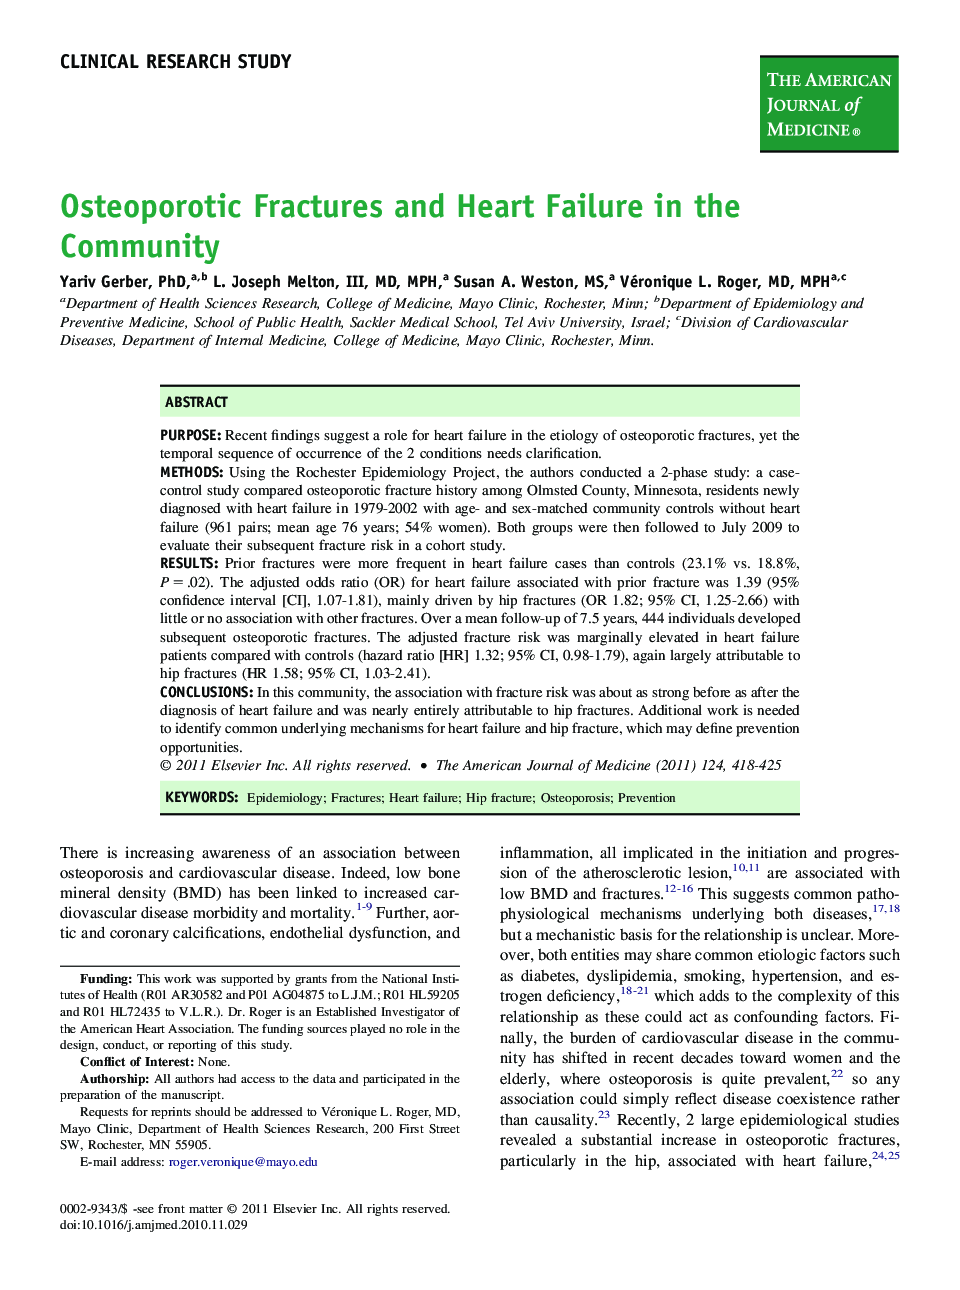 Osteoporotic Fractures and Heart Failure in the Community 